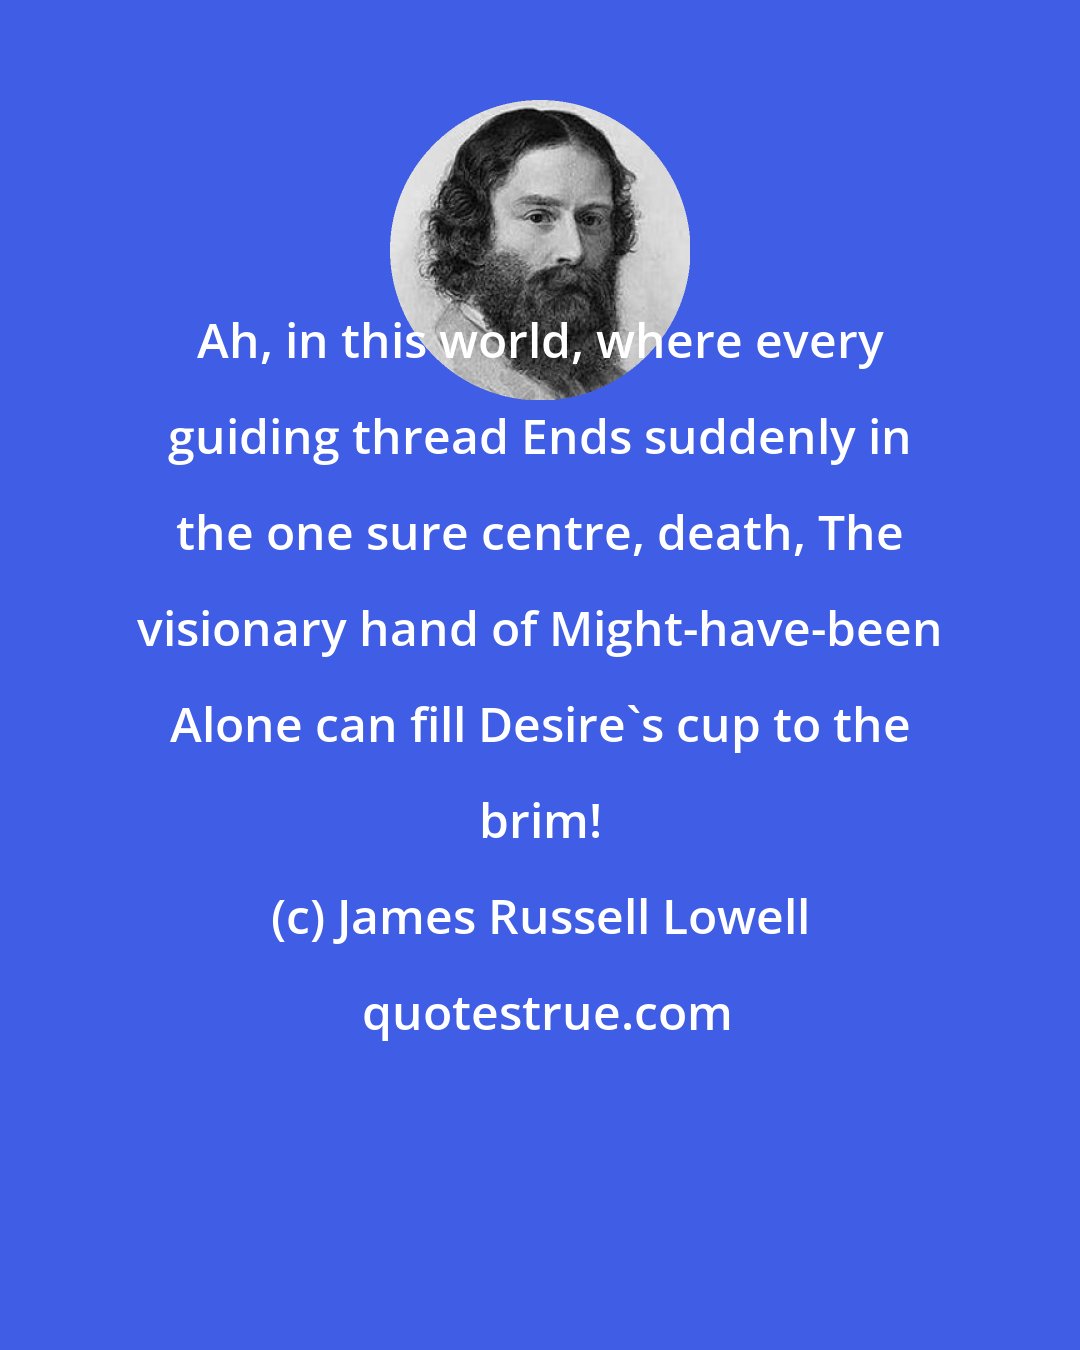 James Russell Lowell: Ah, in this world, where every guiding thread Ends suddenly in the one sure centre, death, The visionary hand of Might-have-been Alone can fill Desire's cup to the brim!